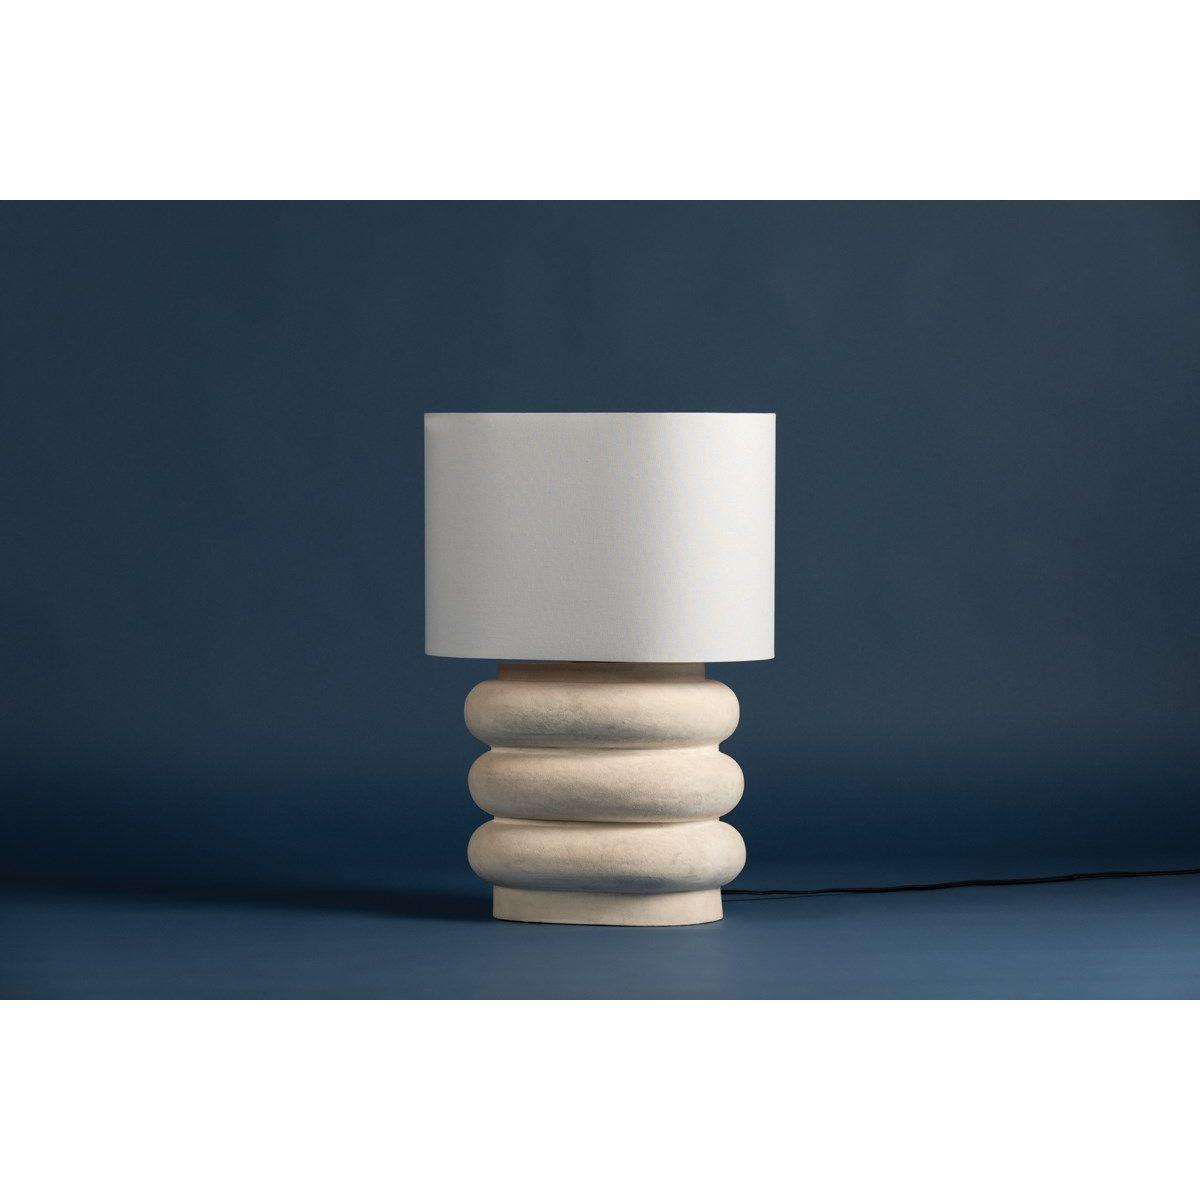 Ewing Table Lamp Weathered Ivory Ceramic and Aged Brass Accents